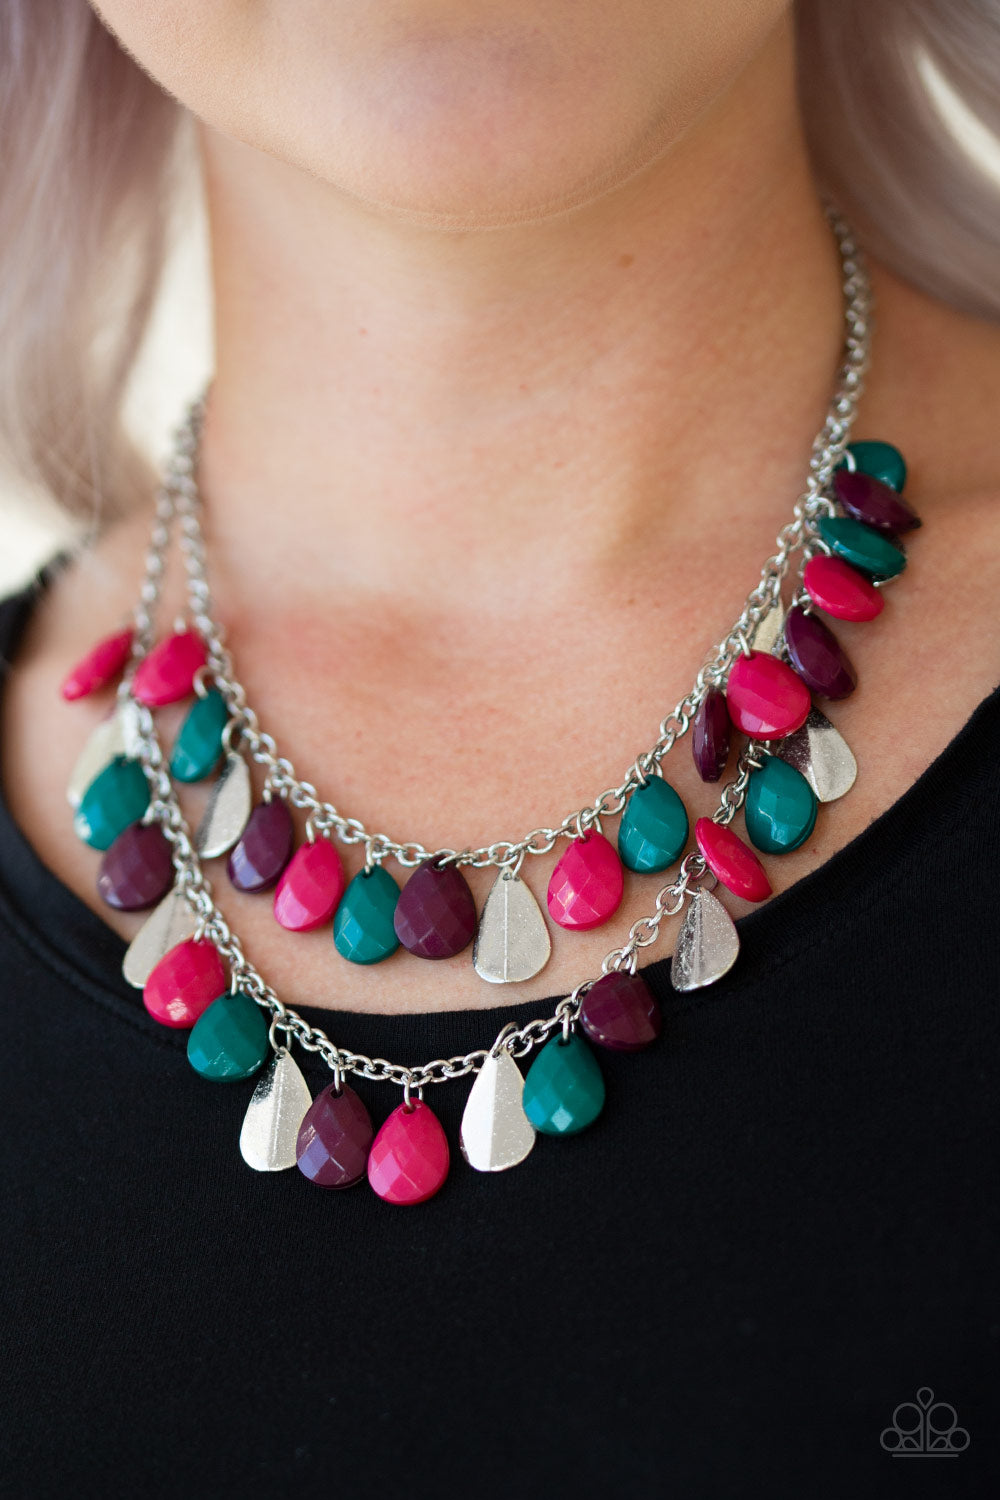 Life of the FIESTA - Multicolor necklace